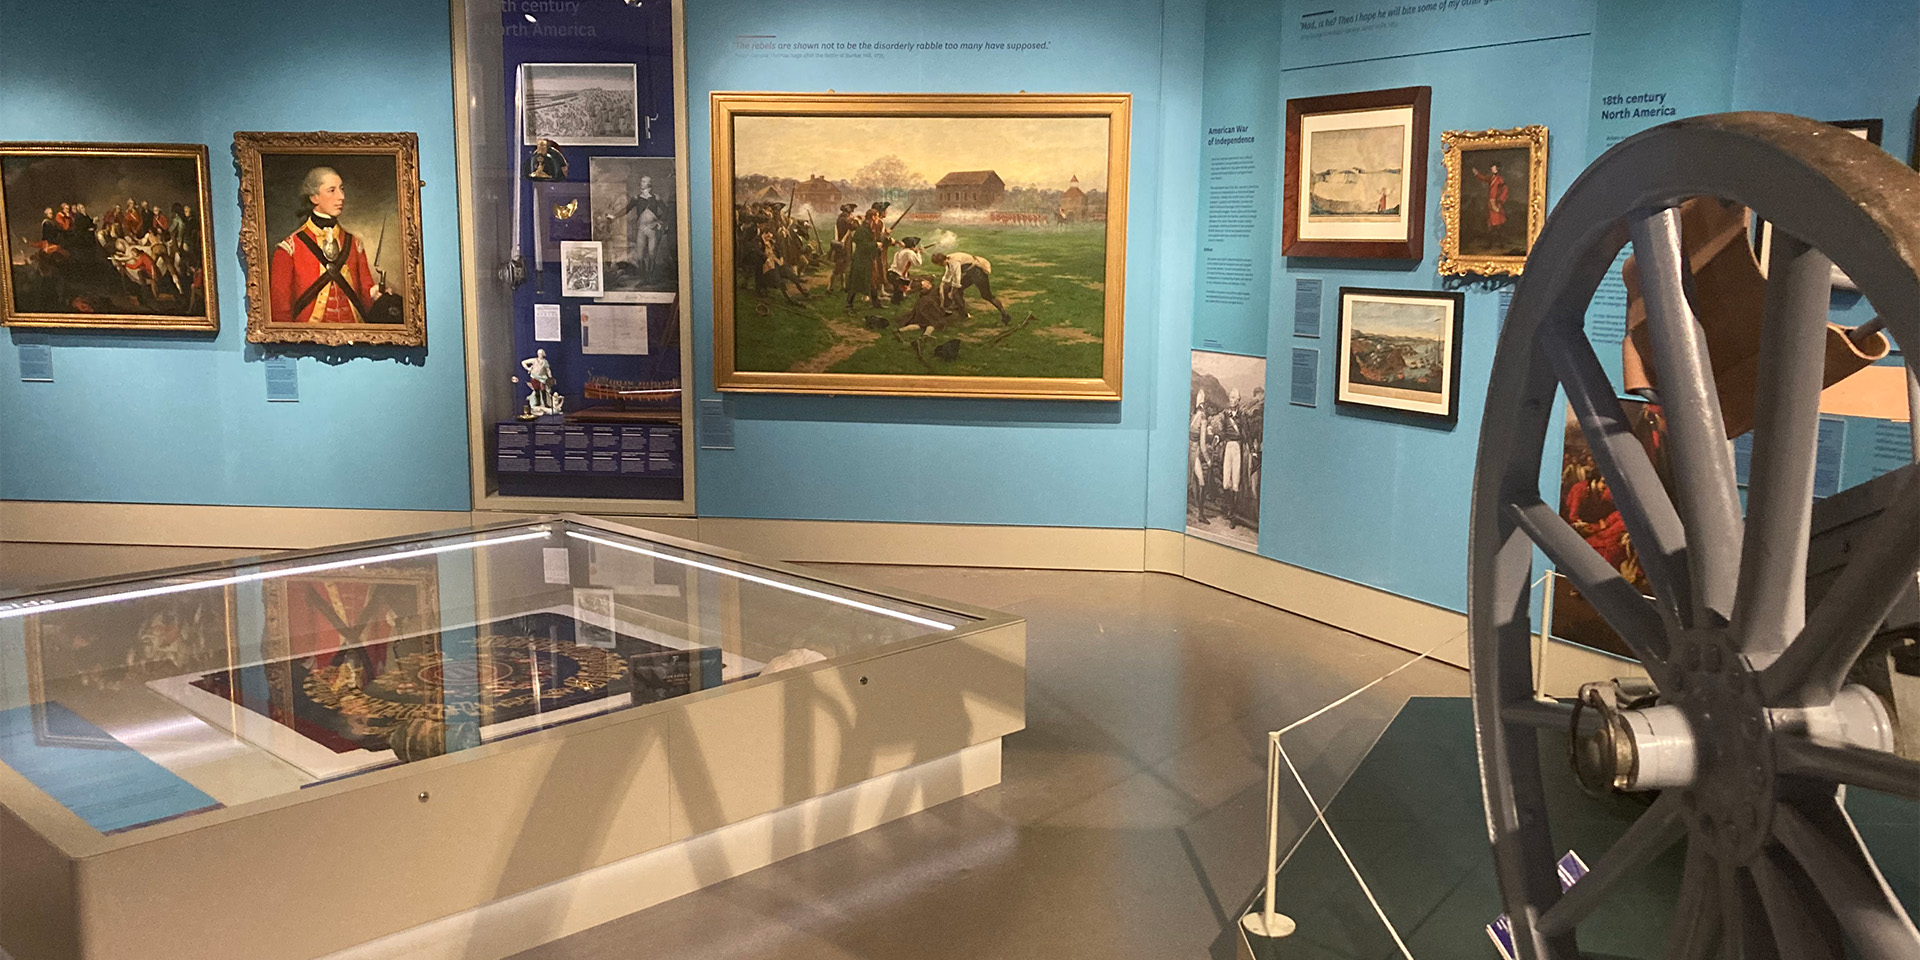 North American display in the Global Role gallery